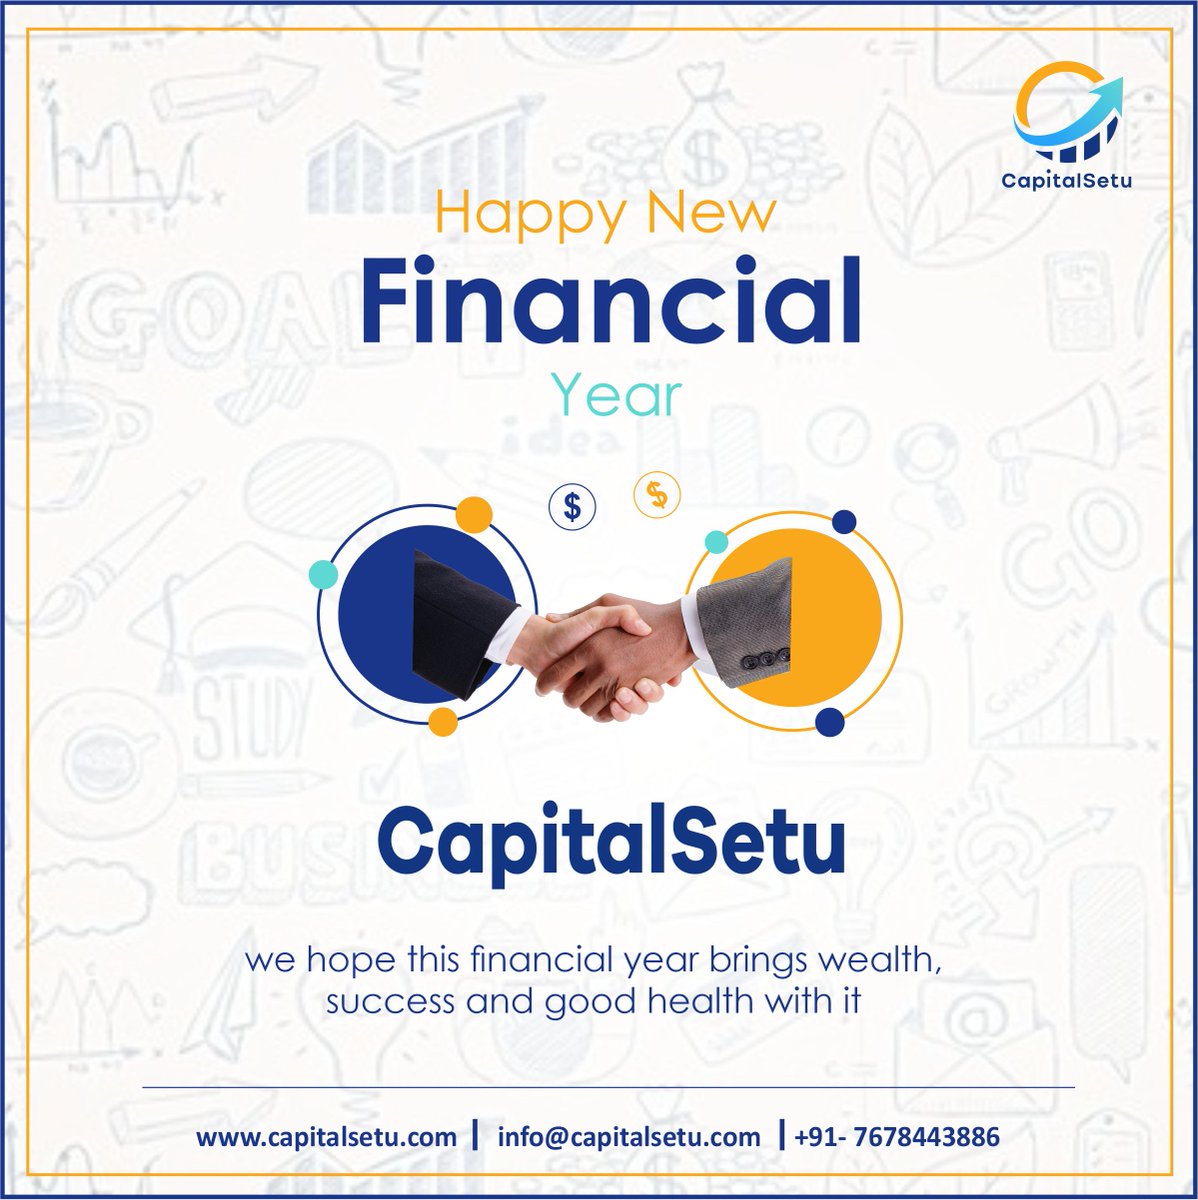 Starting the new financial year on the right foot with Capital Setu! 
Let's make it a prosperous year ahead!
 #CapitalSetu #NewFinancialYear #ProsperityAhead  #financialyear  #buisness #india #businessgrowthstrategies #buisnessgrowth #invoicefinance #startup #msmeindia #fintech